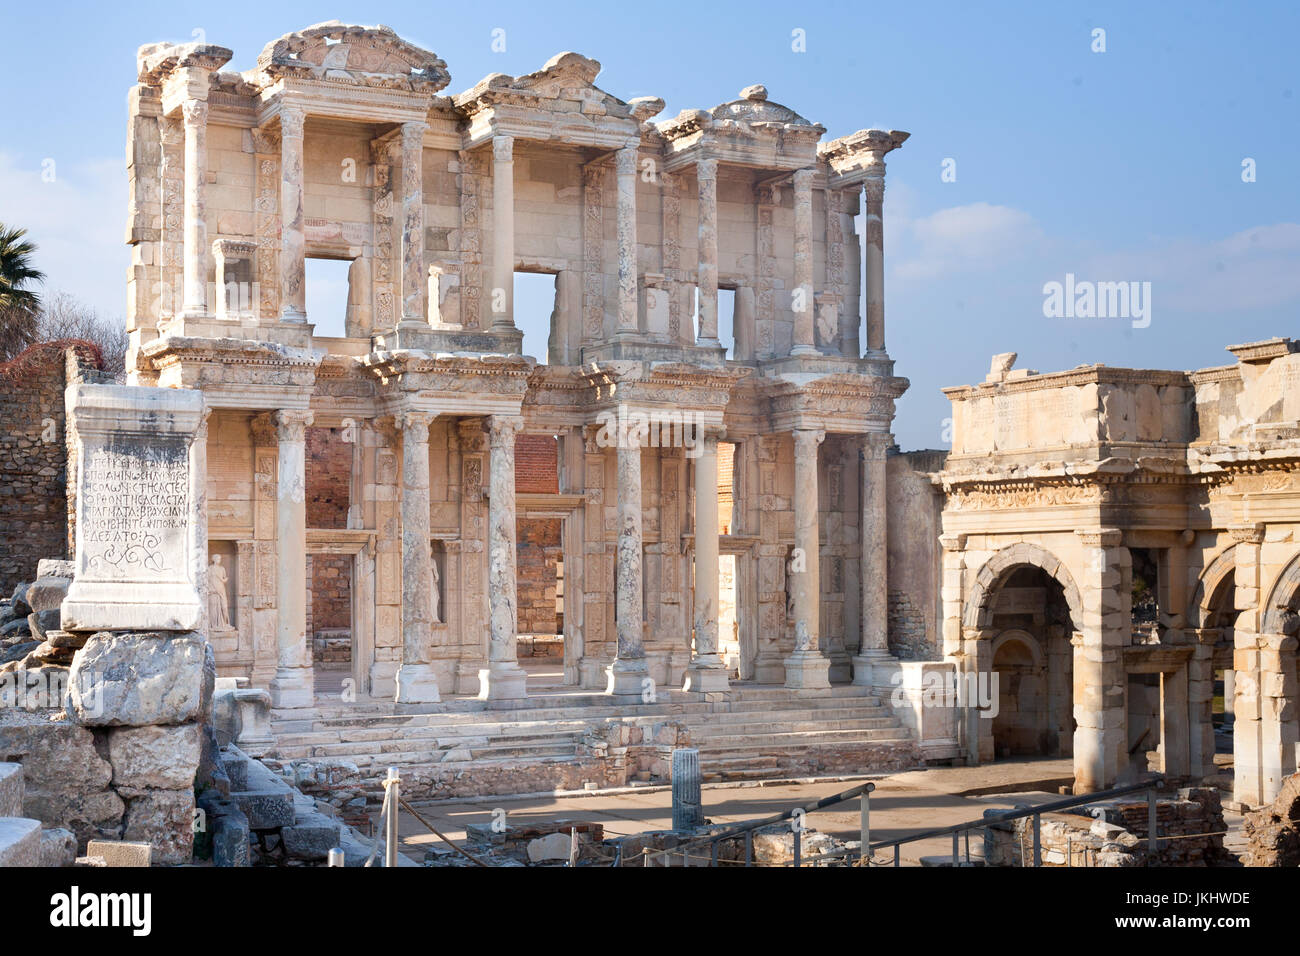 Roman Library facade with stone columns in ephesus Archaeological site in turkey Stock Photo